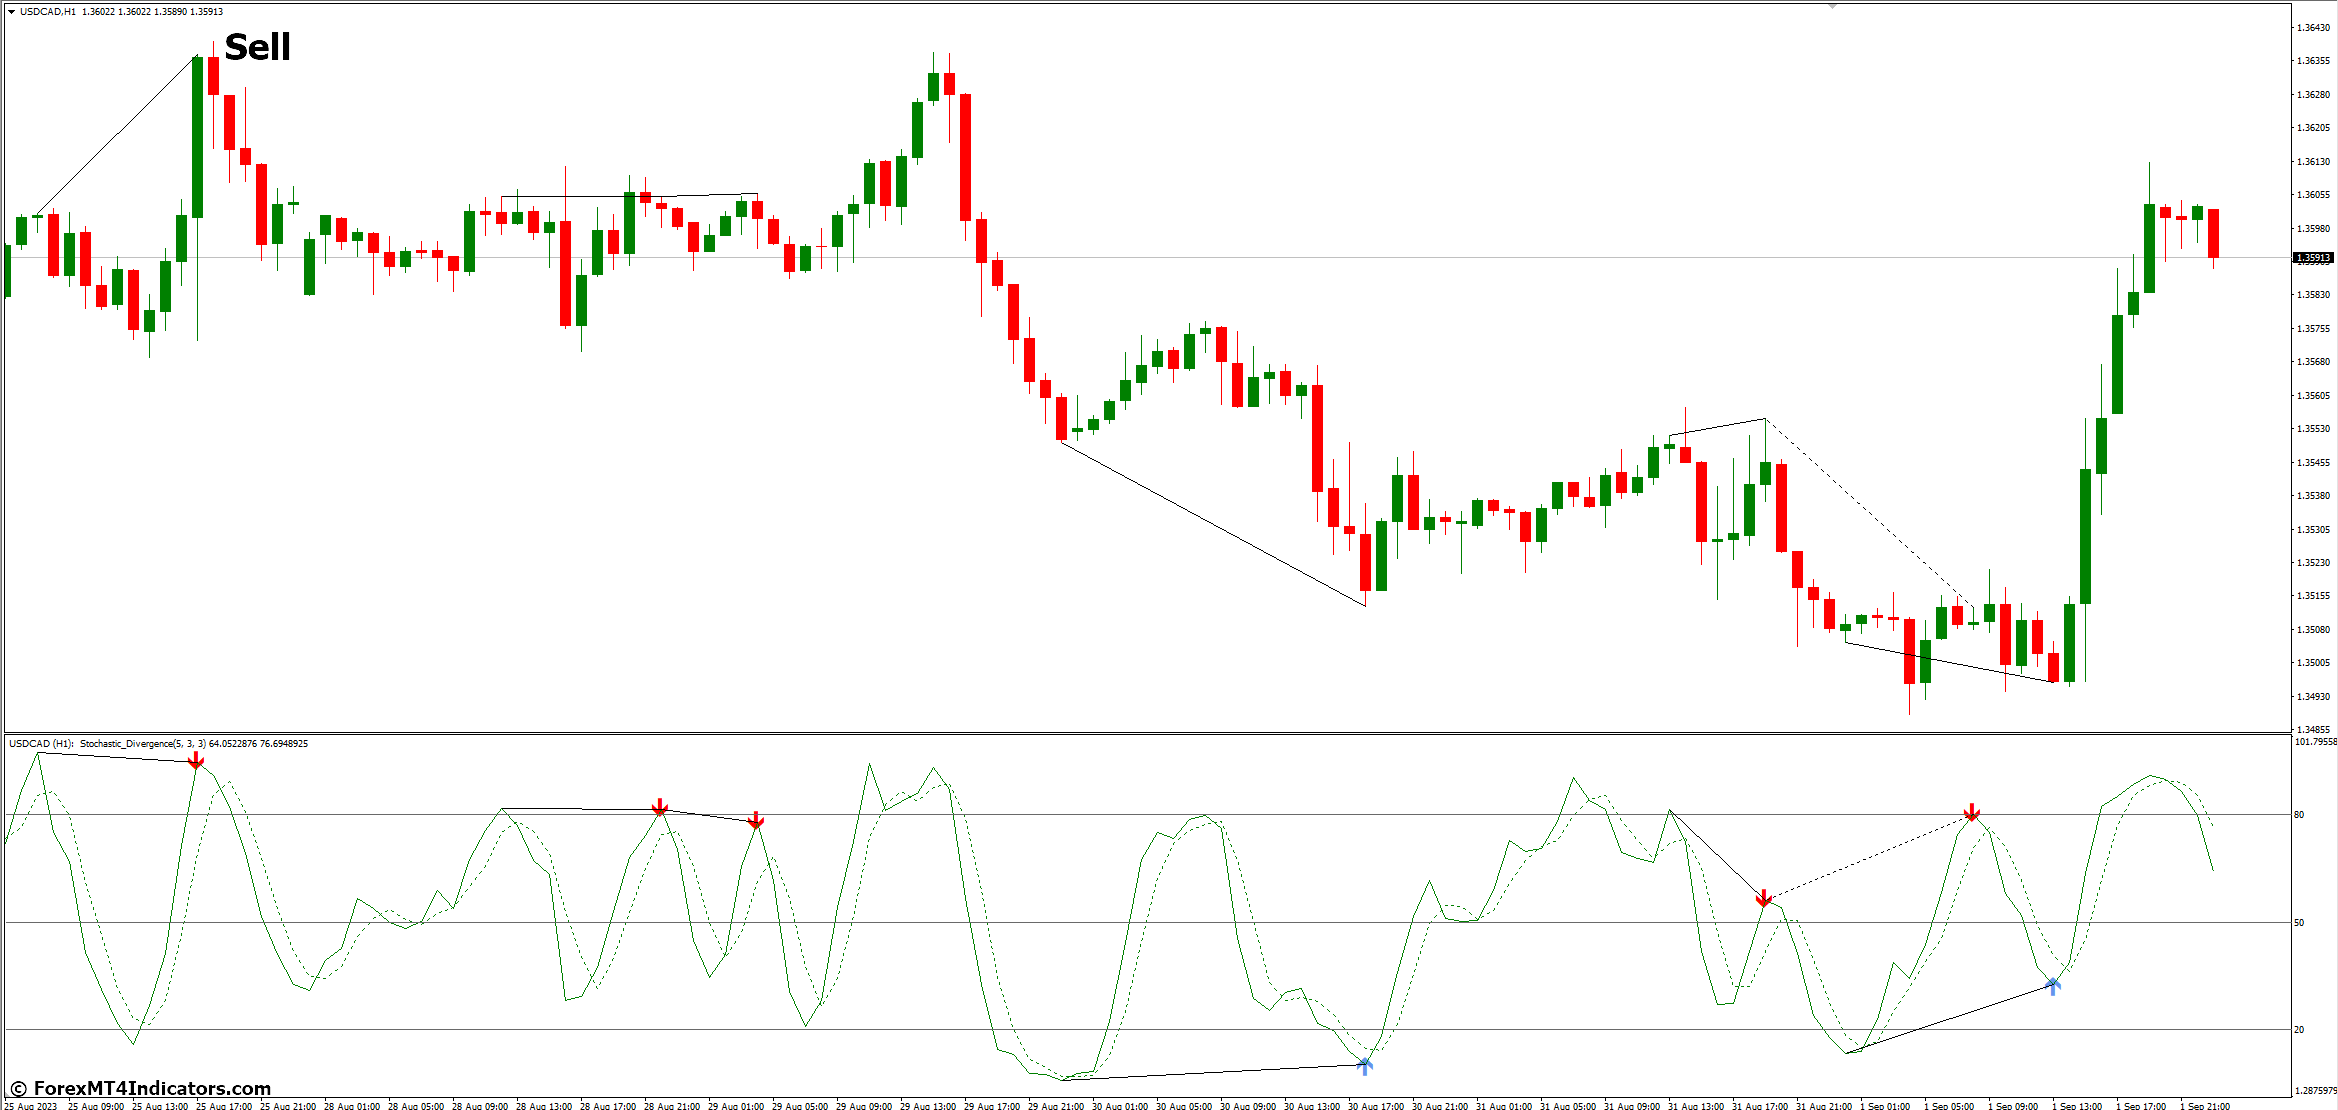 How to Trade with Stochastic Divergence MT4 Indicator - Sell Entry